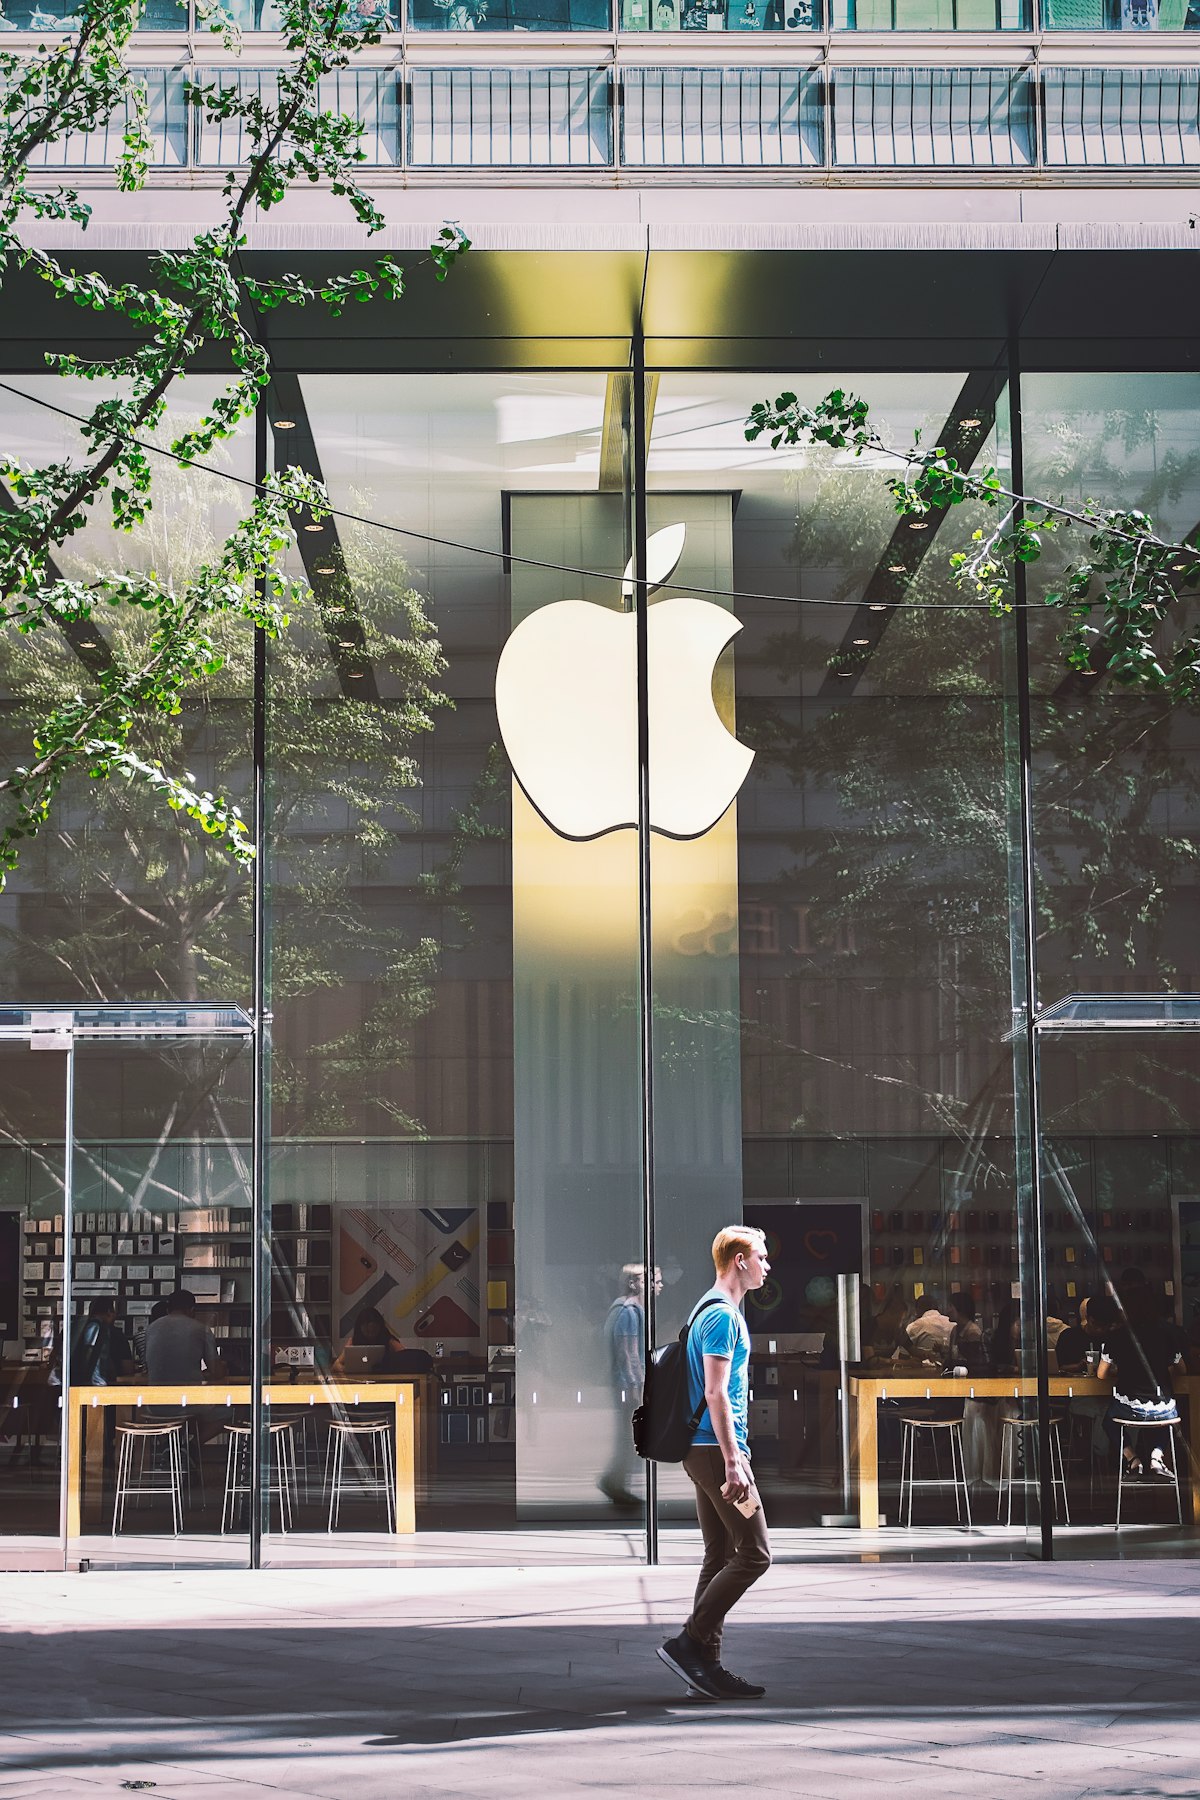 A Guide To Apple's Brand Ambassadors